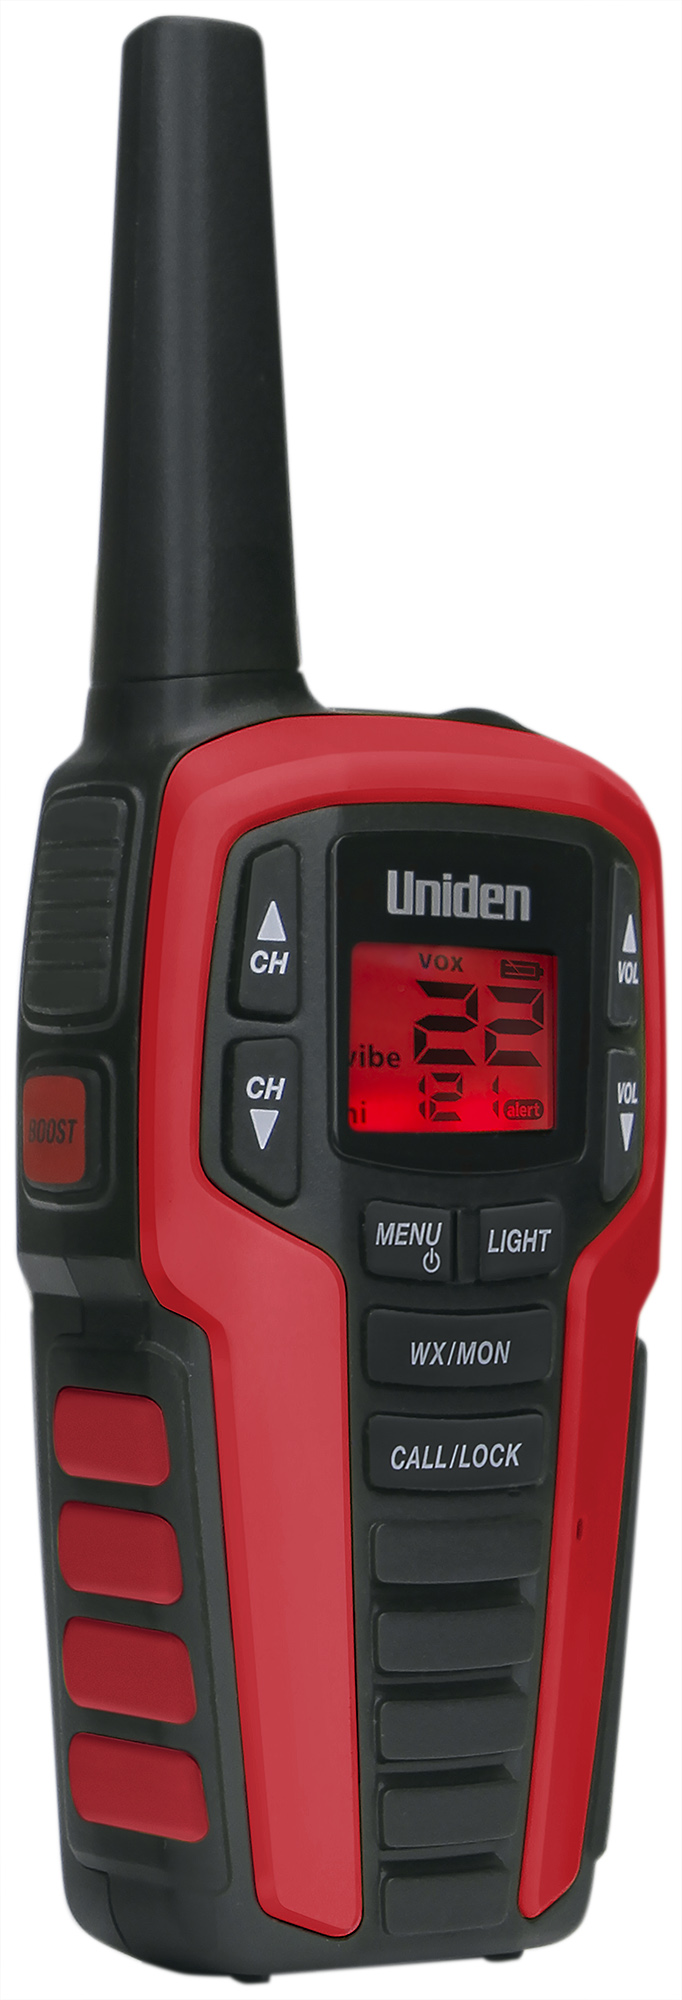 Uniden 40 Mile 22 Channel Two-Way Radios, Black  Red (3 Pack) SX409-3VP 